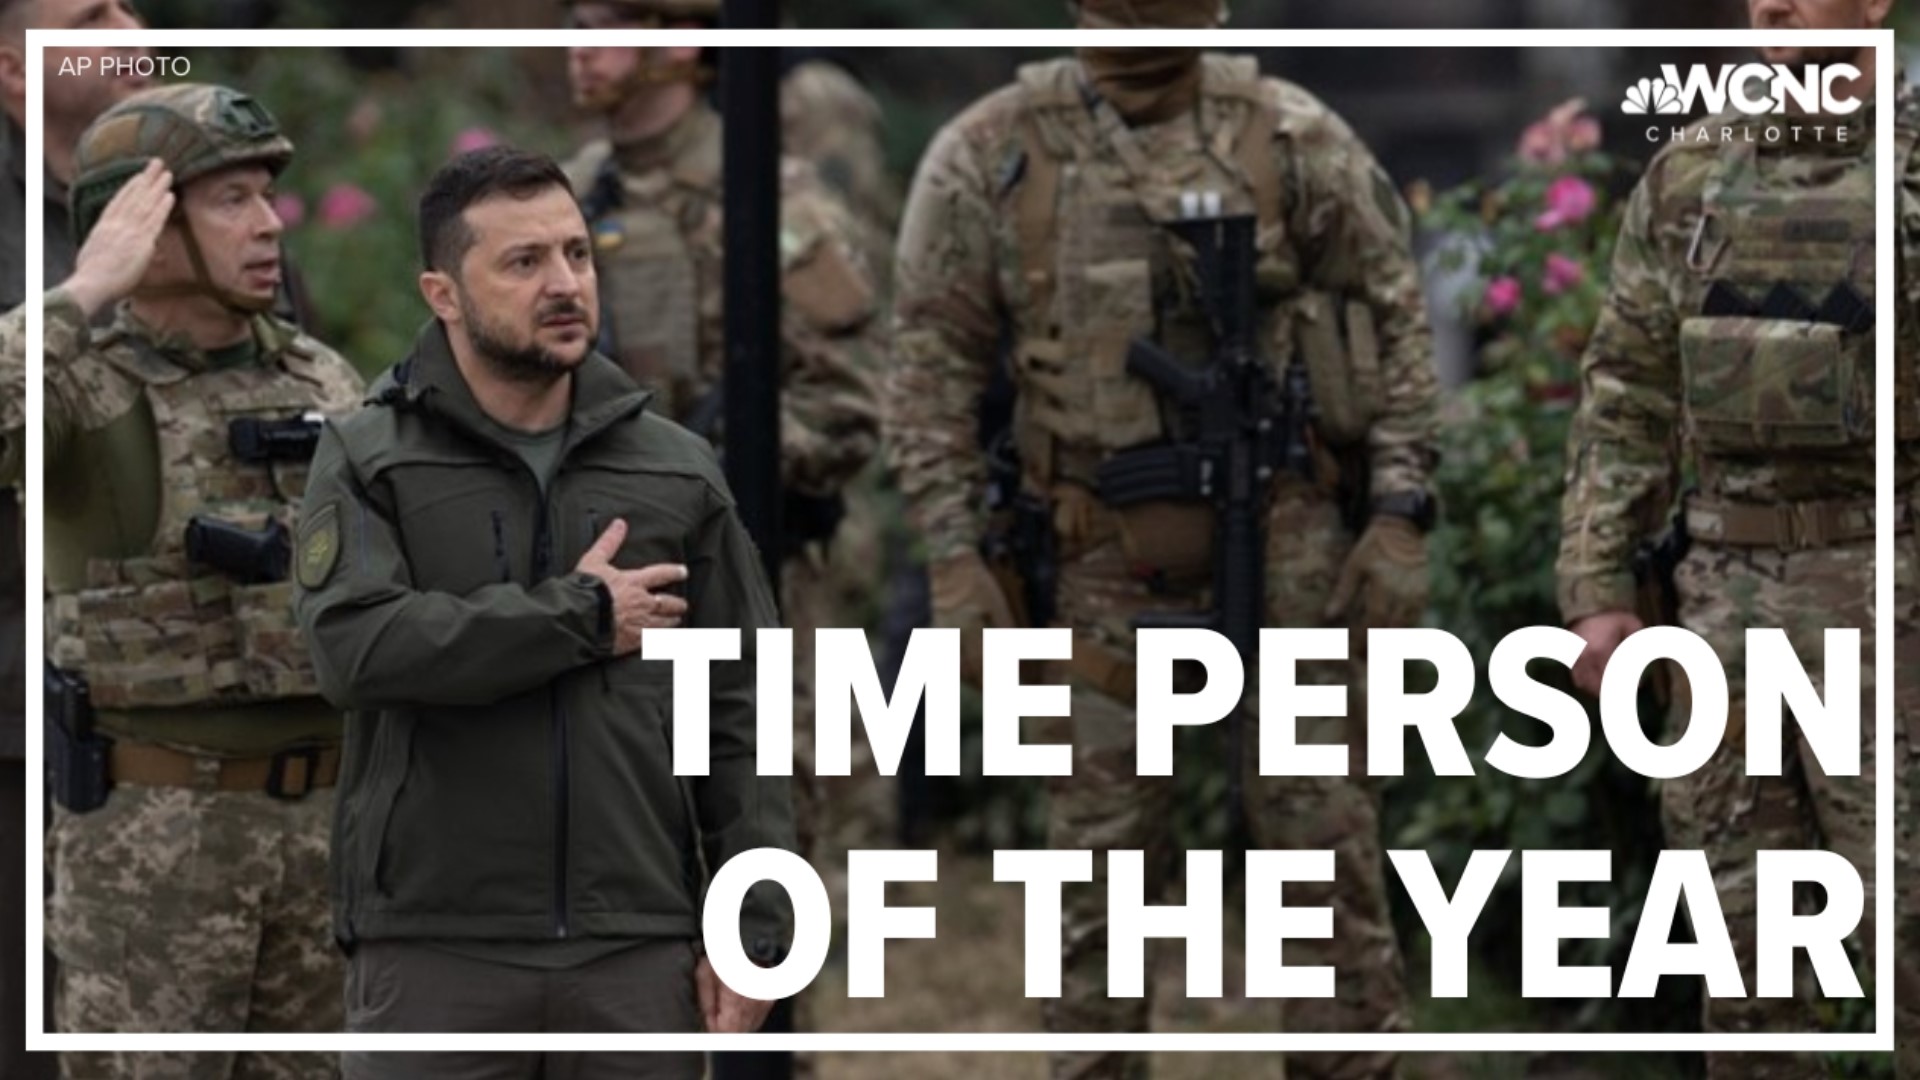 Ukrainian President Volodymyr Zelensky has been selected as TIME's Person of the Year for 2022 because he embodies the spirit of Ukraine, according to the magazine.